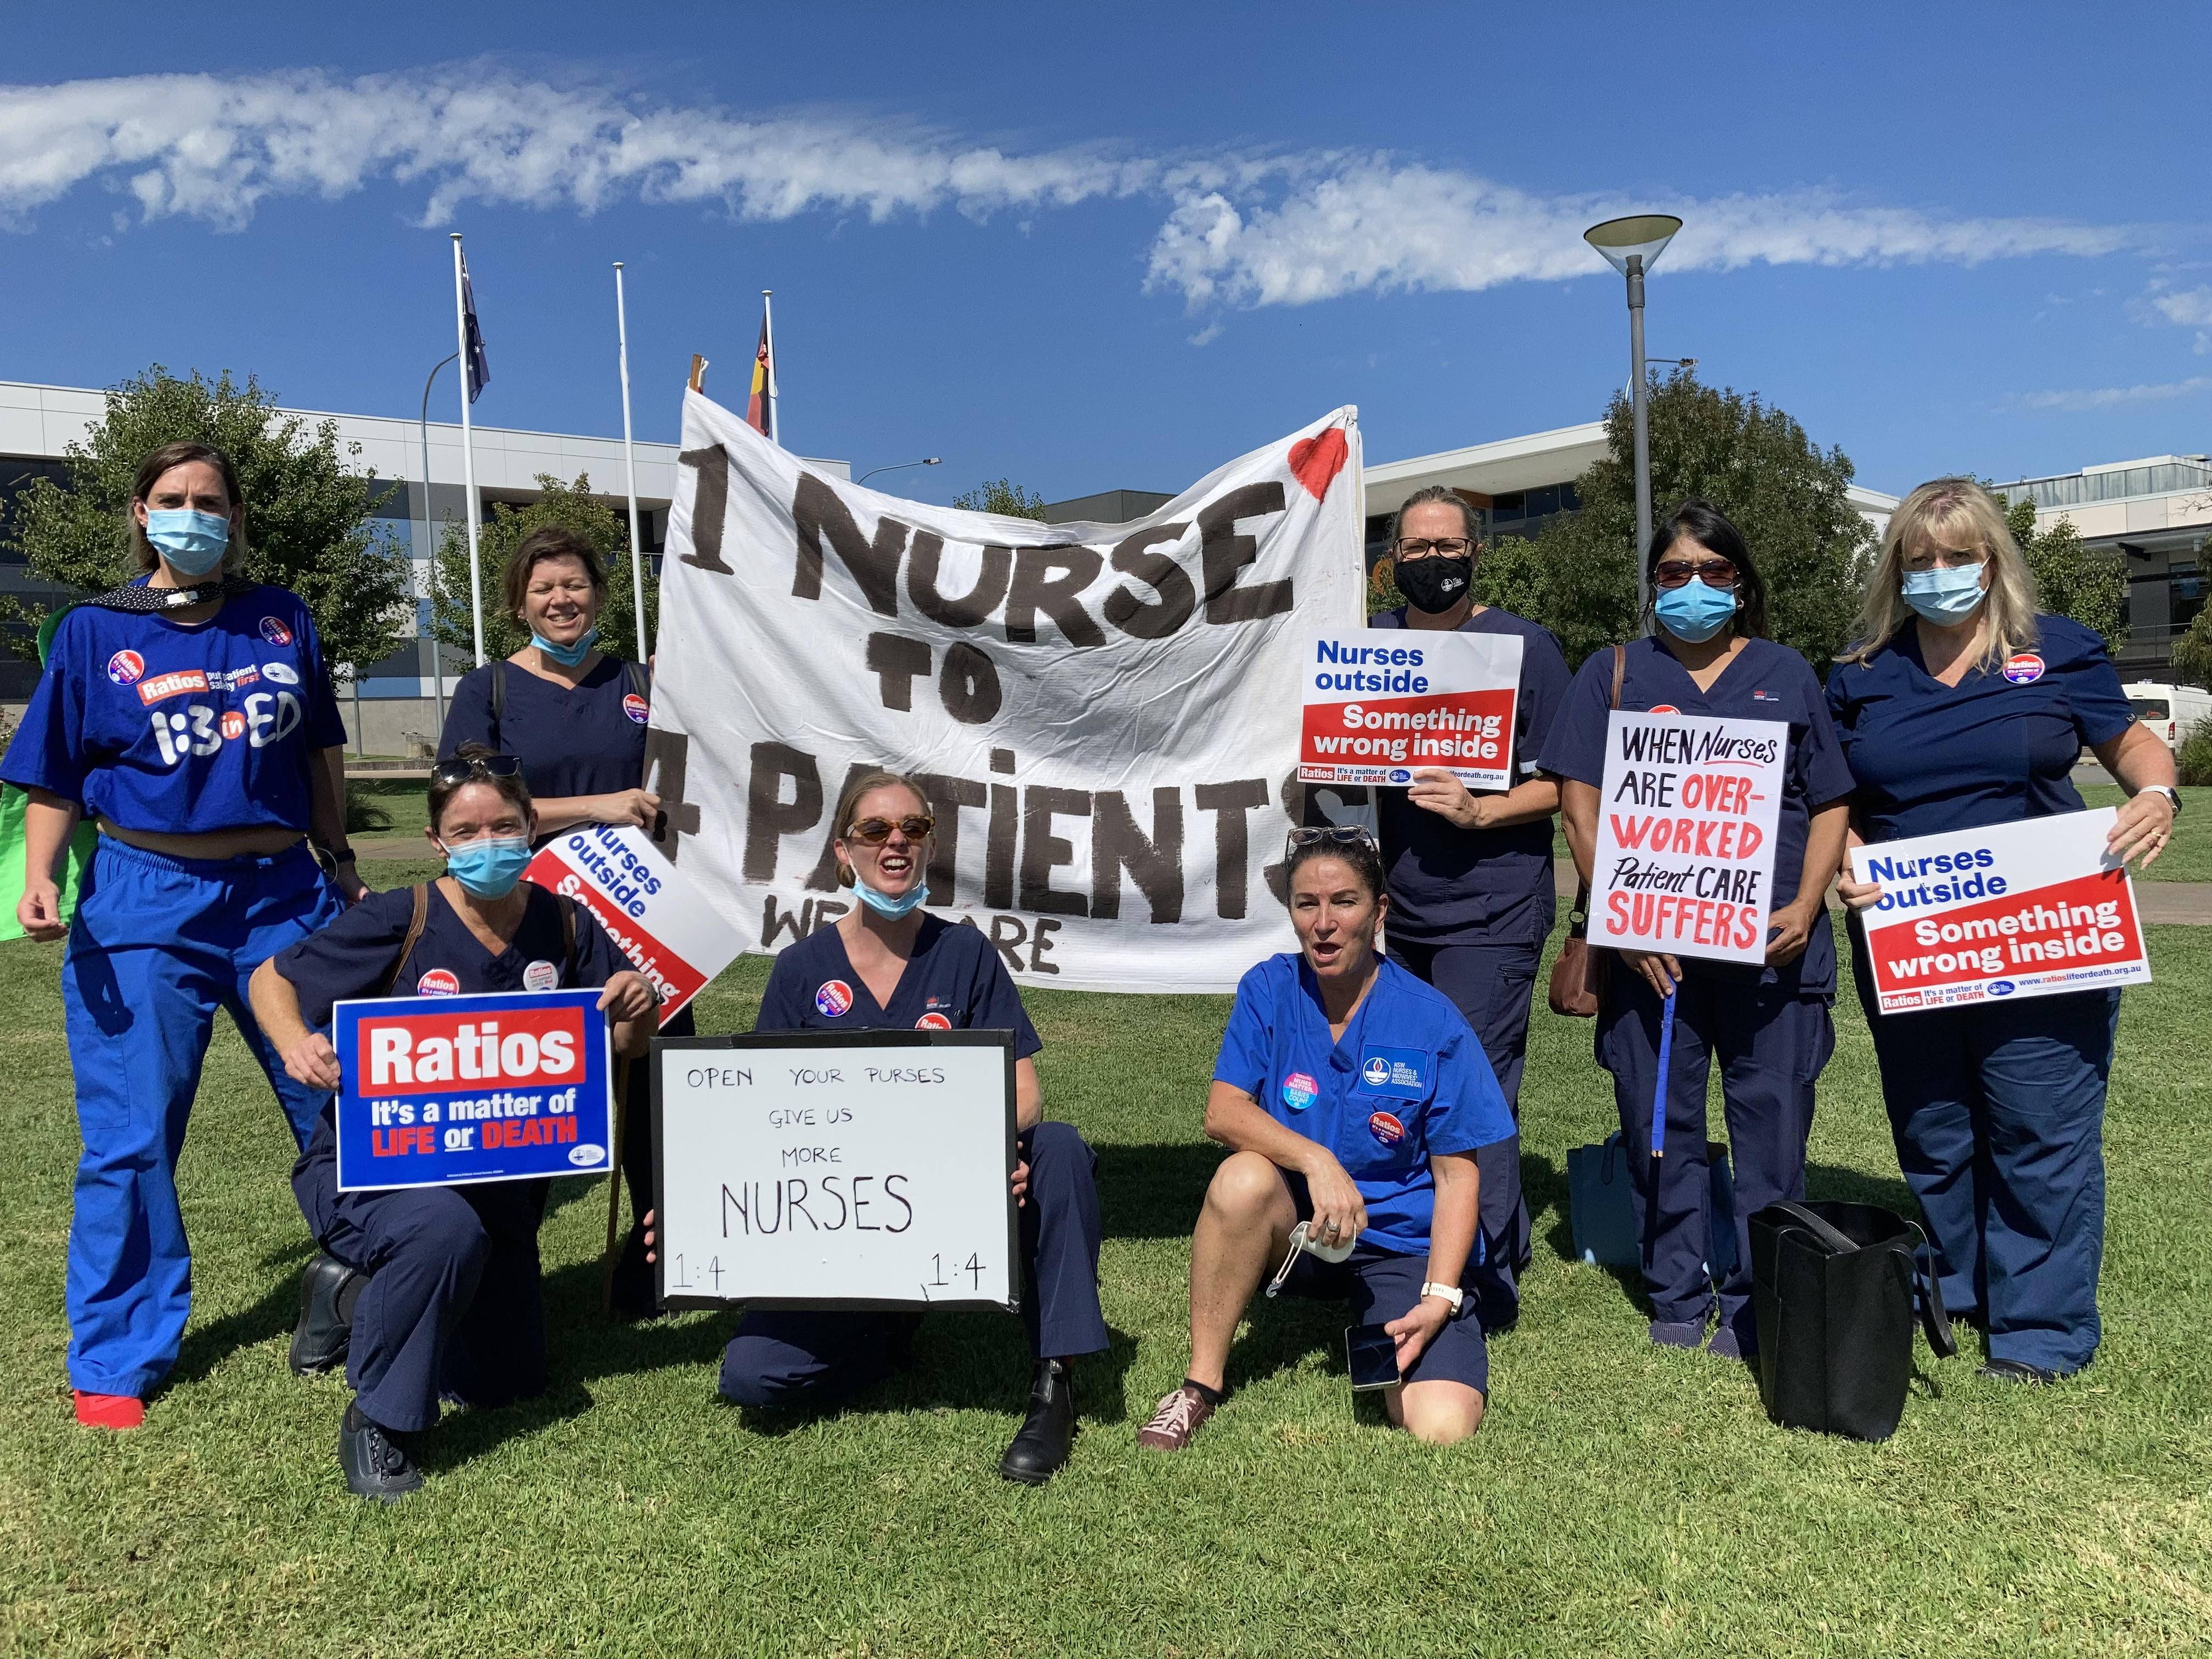 South Coast nurses call for community support for strike action